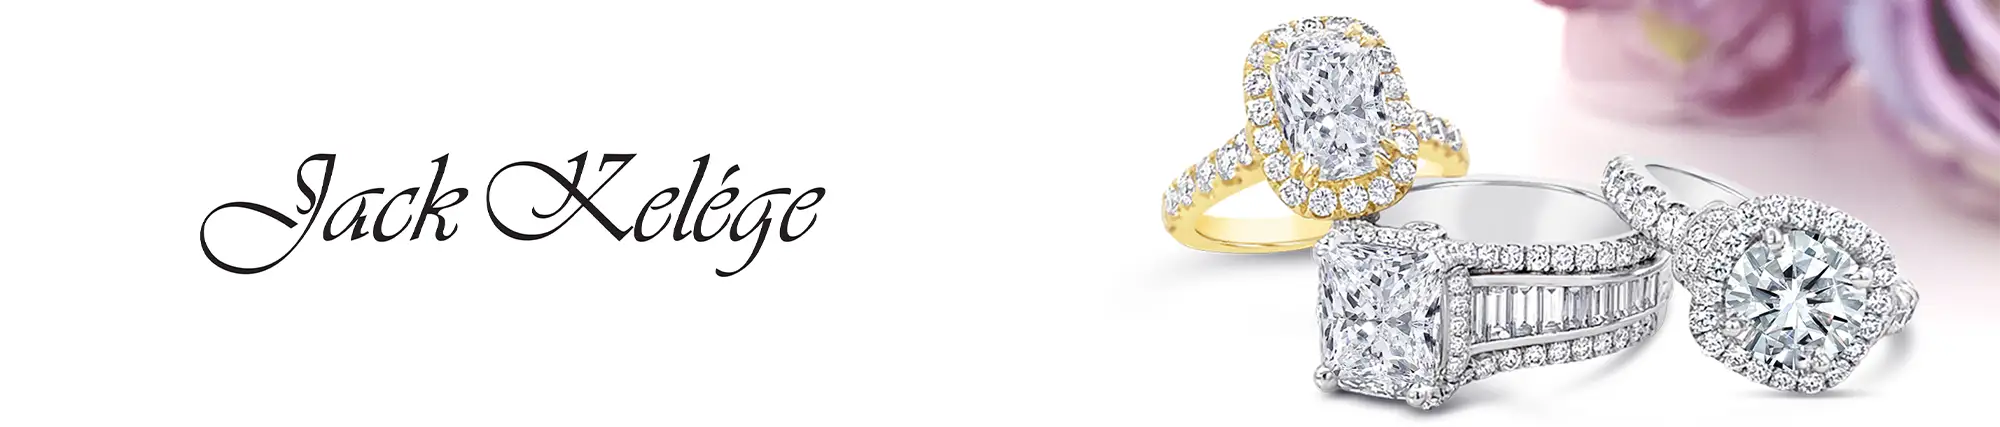 Jack Kelége Diamond Ring 001-140-03650 18KY Rochester | Cornell's Jewelers  | Rochester, NY